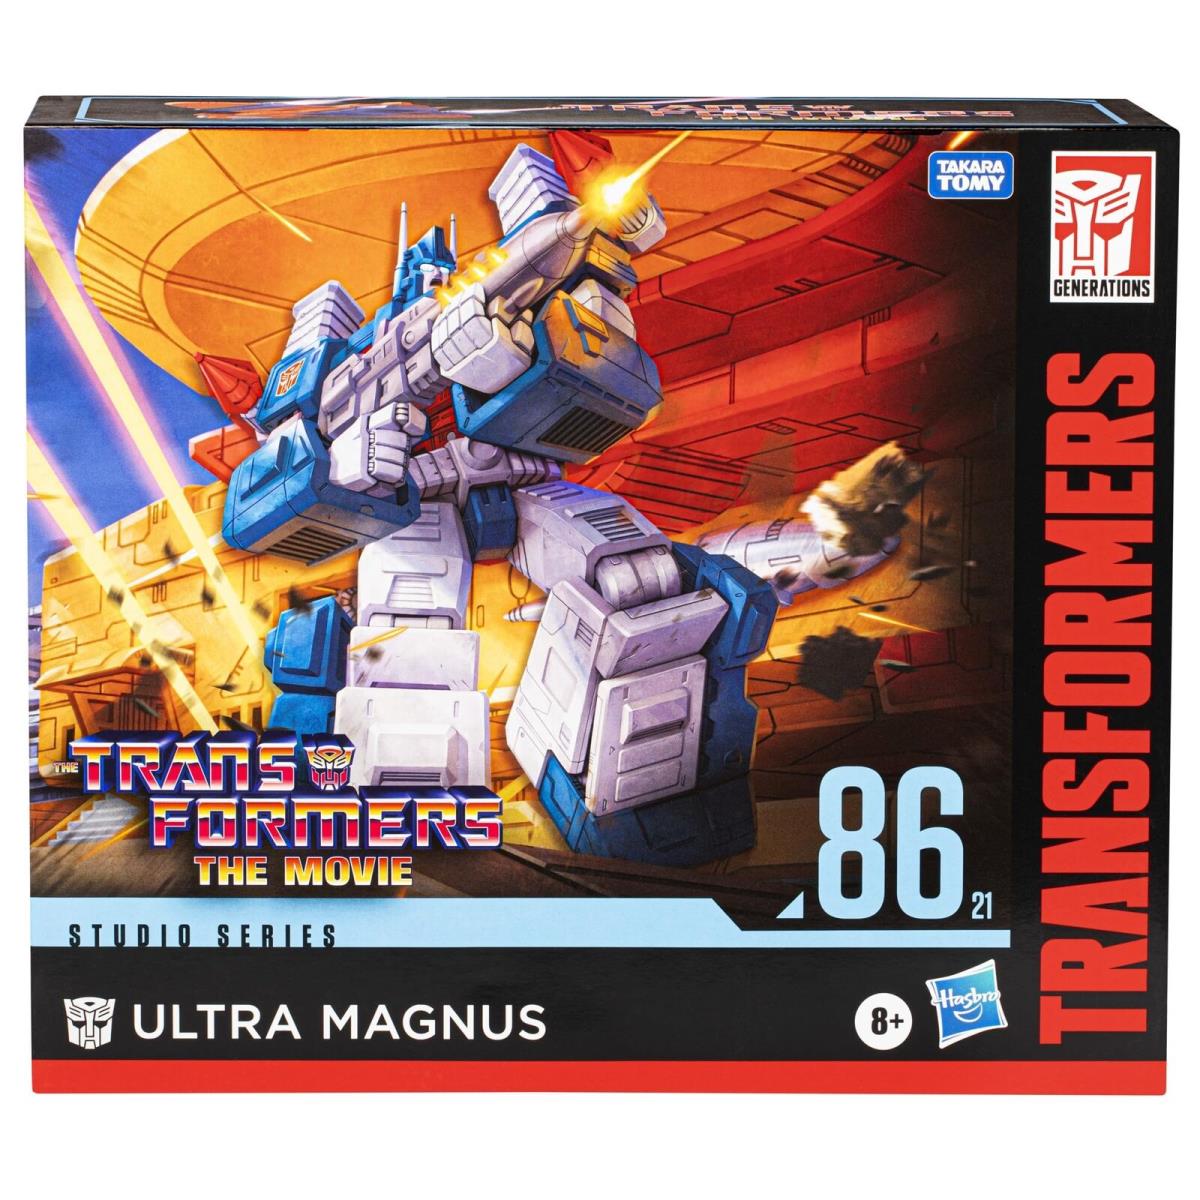 Toys Studio Series Commander The The Movie 86-21 Ultra Magnus Toy 9.5-inch